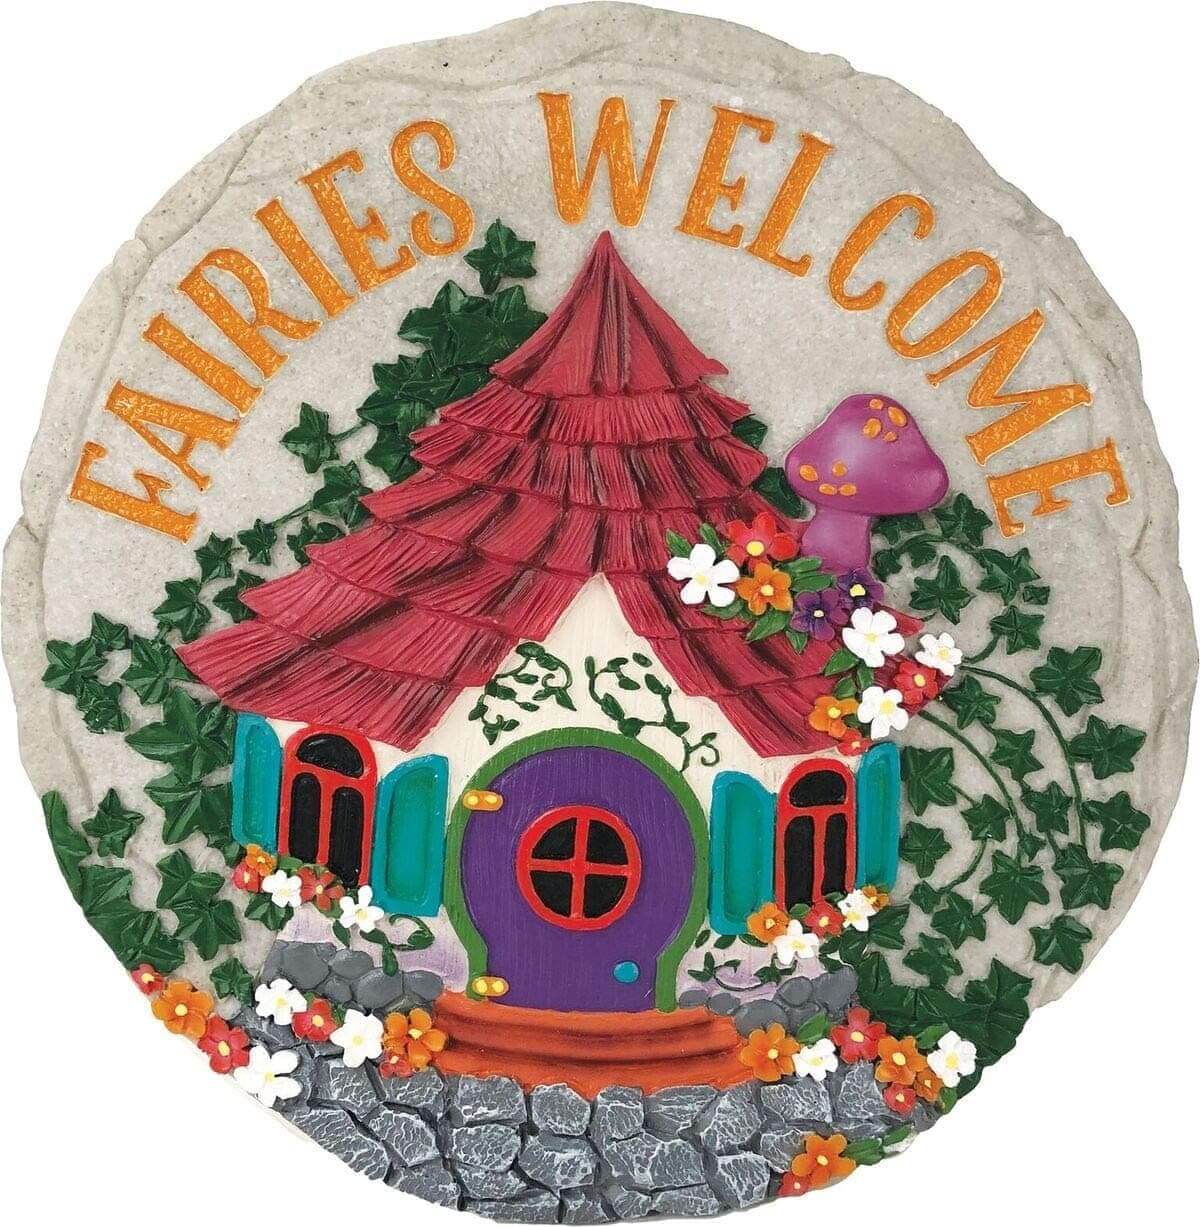 Fairies Welcome Decorative Garden Stone- The House of Awareness